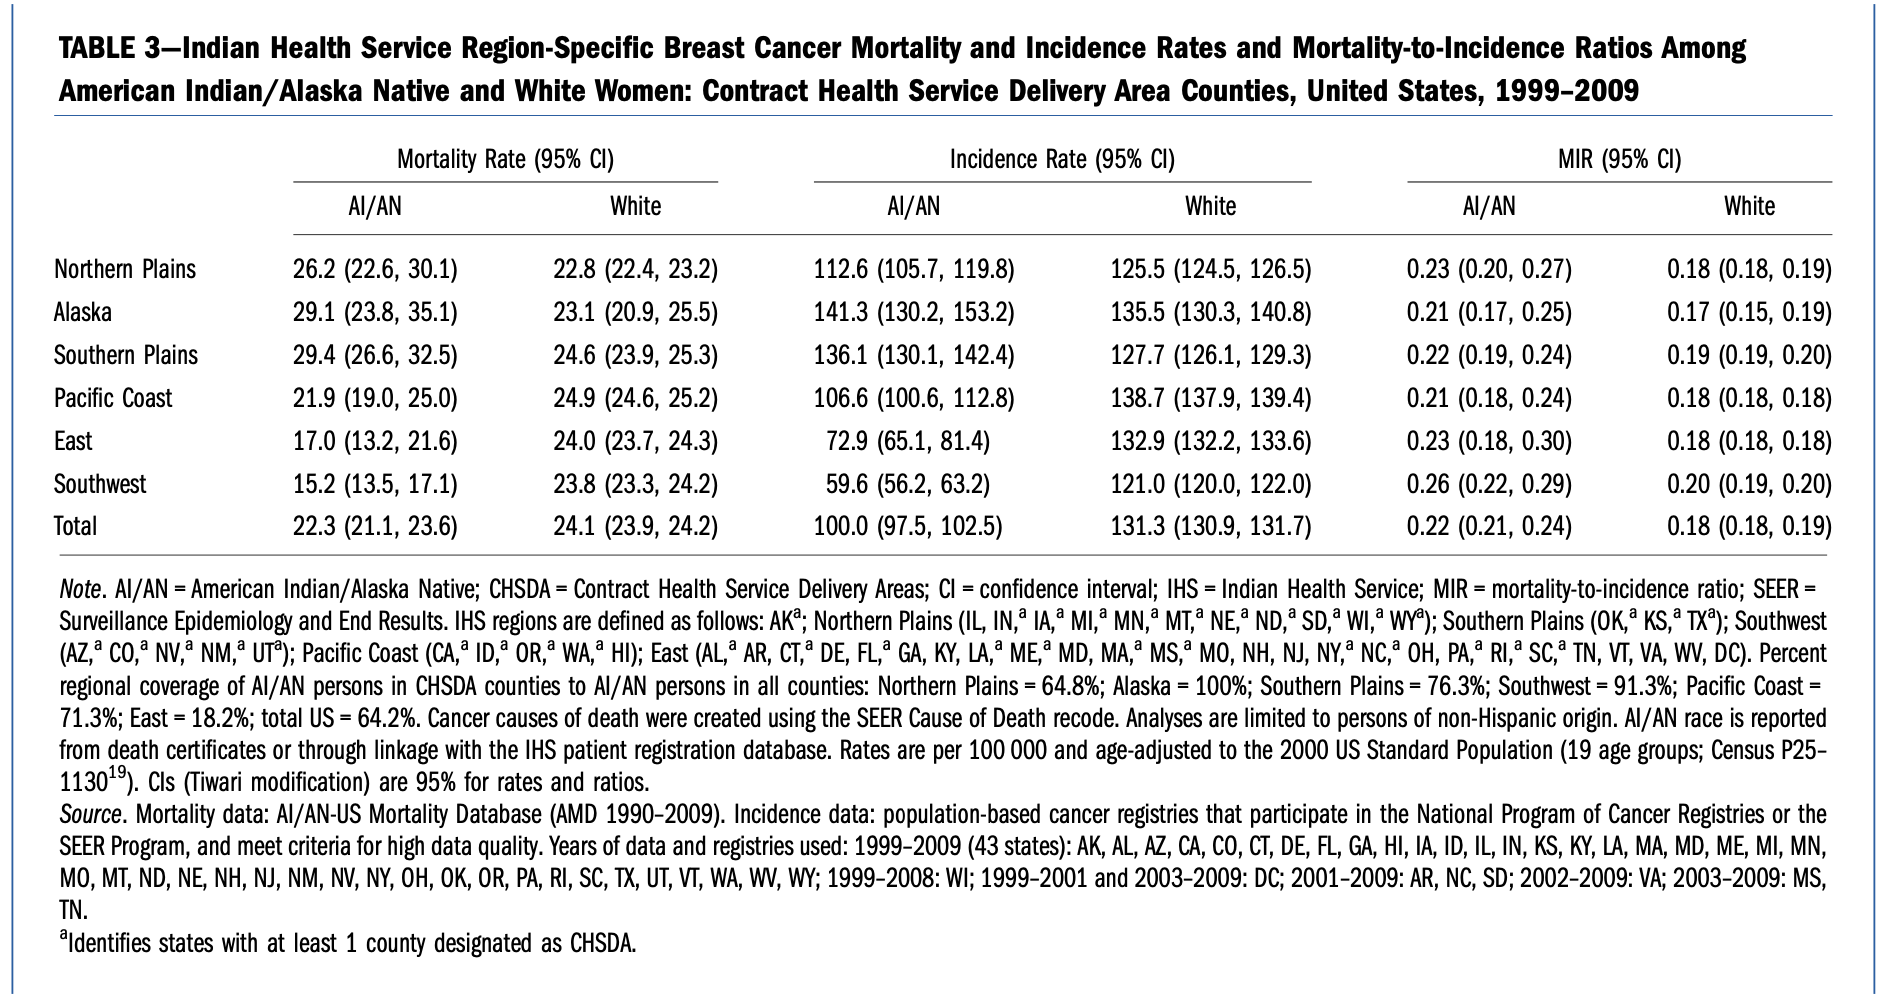 IHS Breast Cancer Mortality, Incidence and Mortality-to-Incidence Rations